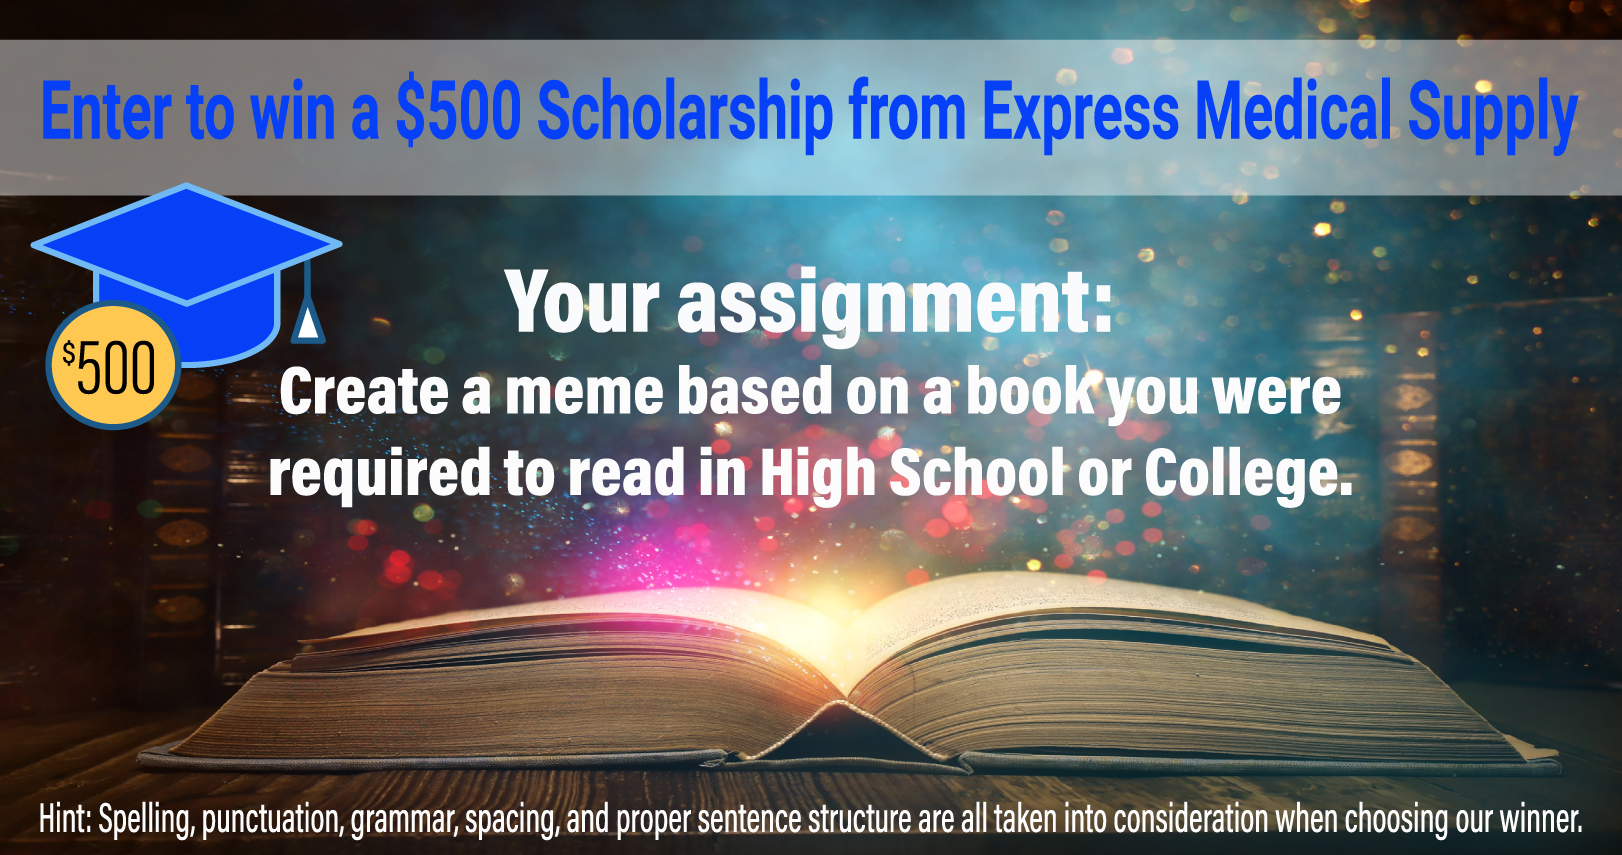 You could earn a $500 Scholarship from Express Medical Supply